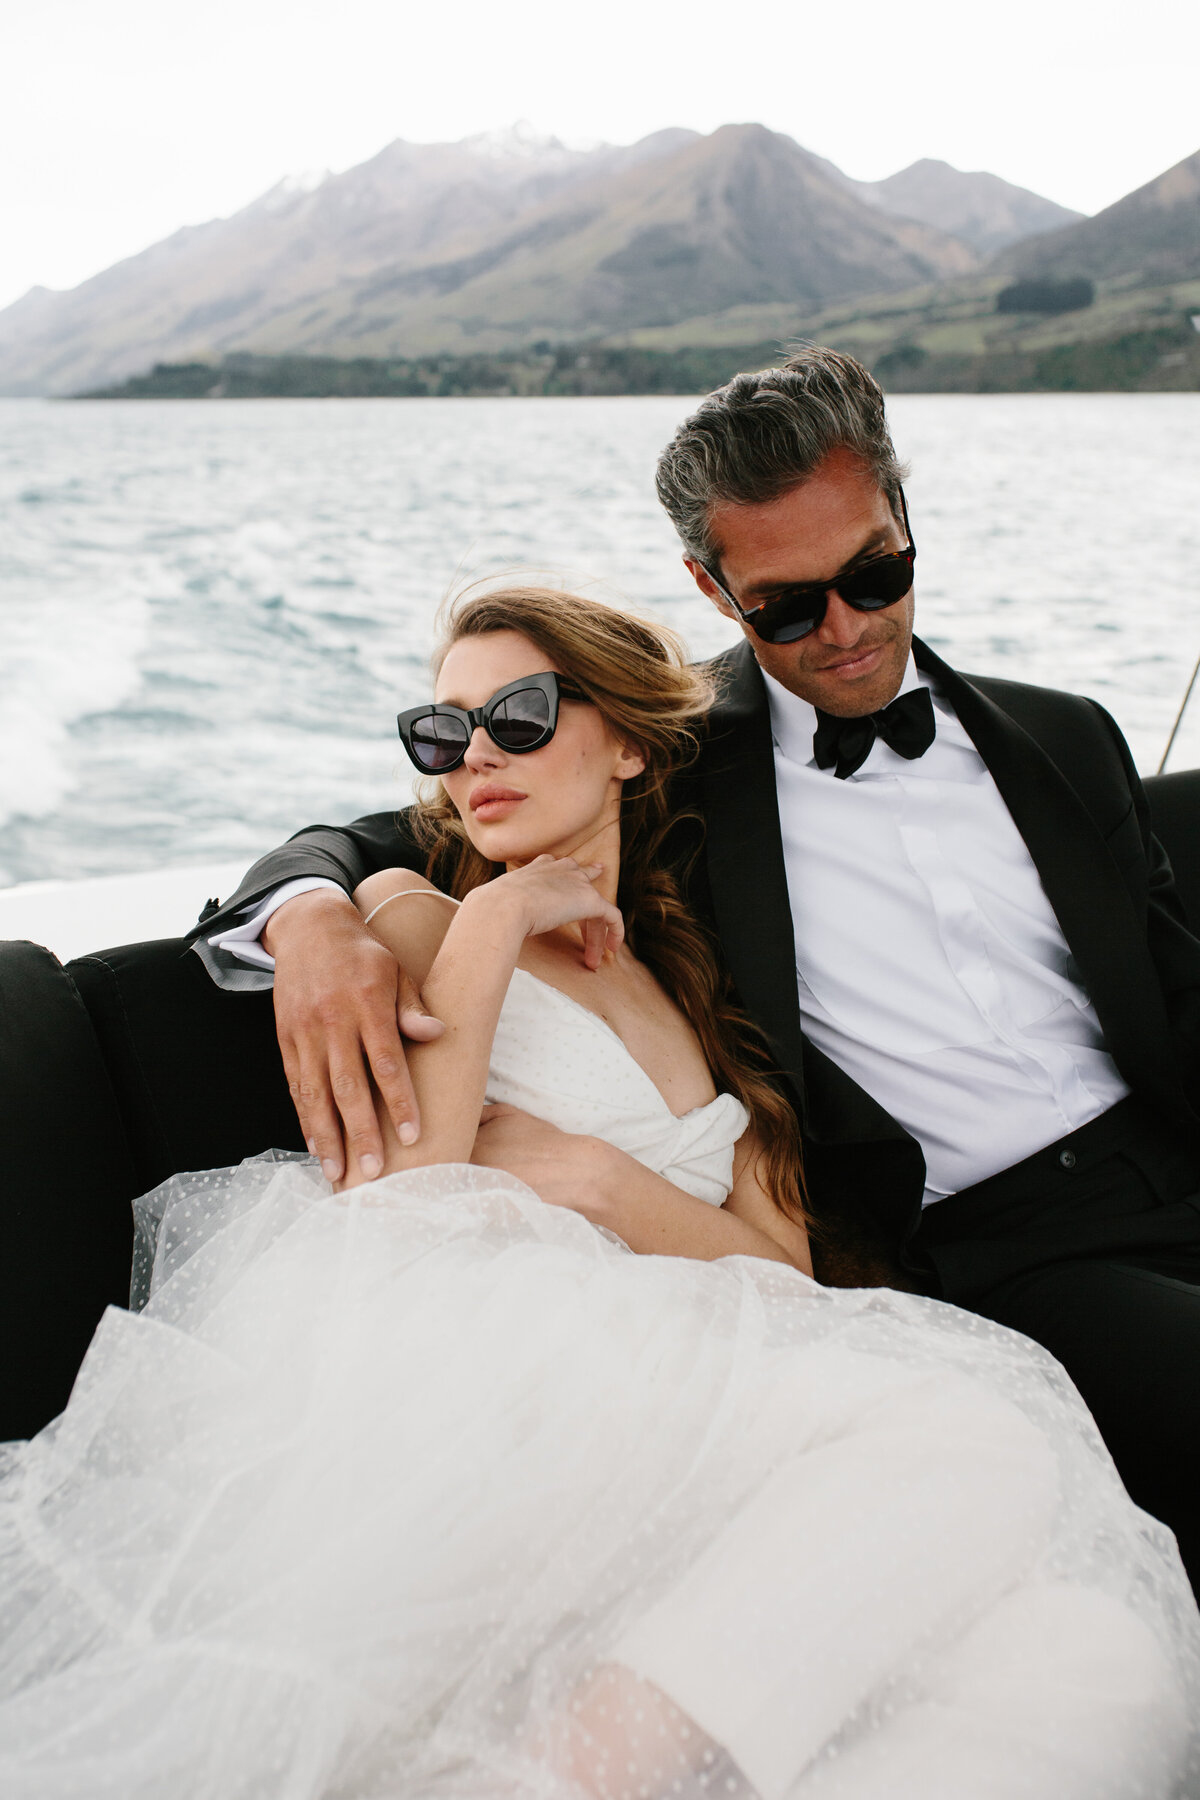 The Lovers Elopement Co - wedding photography - bride and groom embrace on boat on Queenstown lake